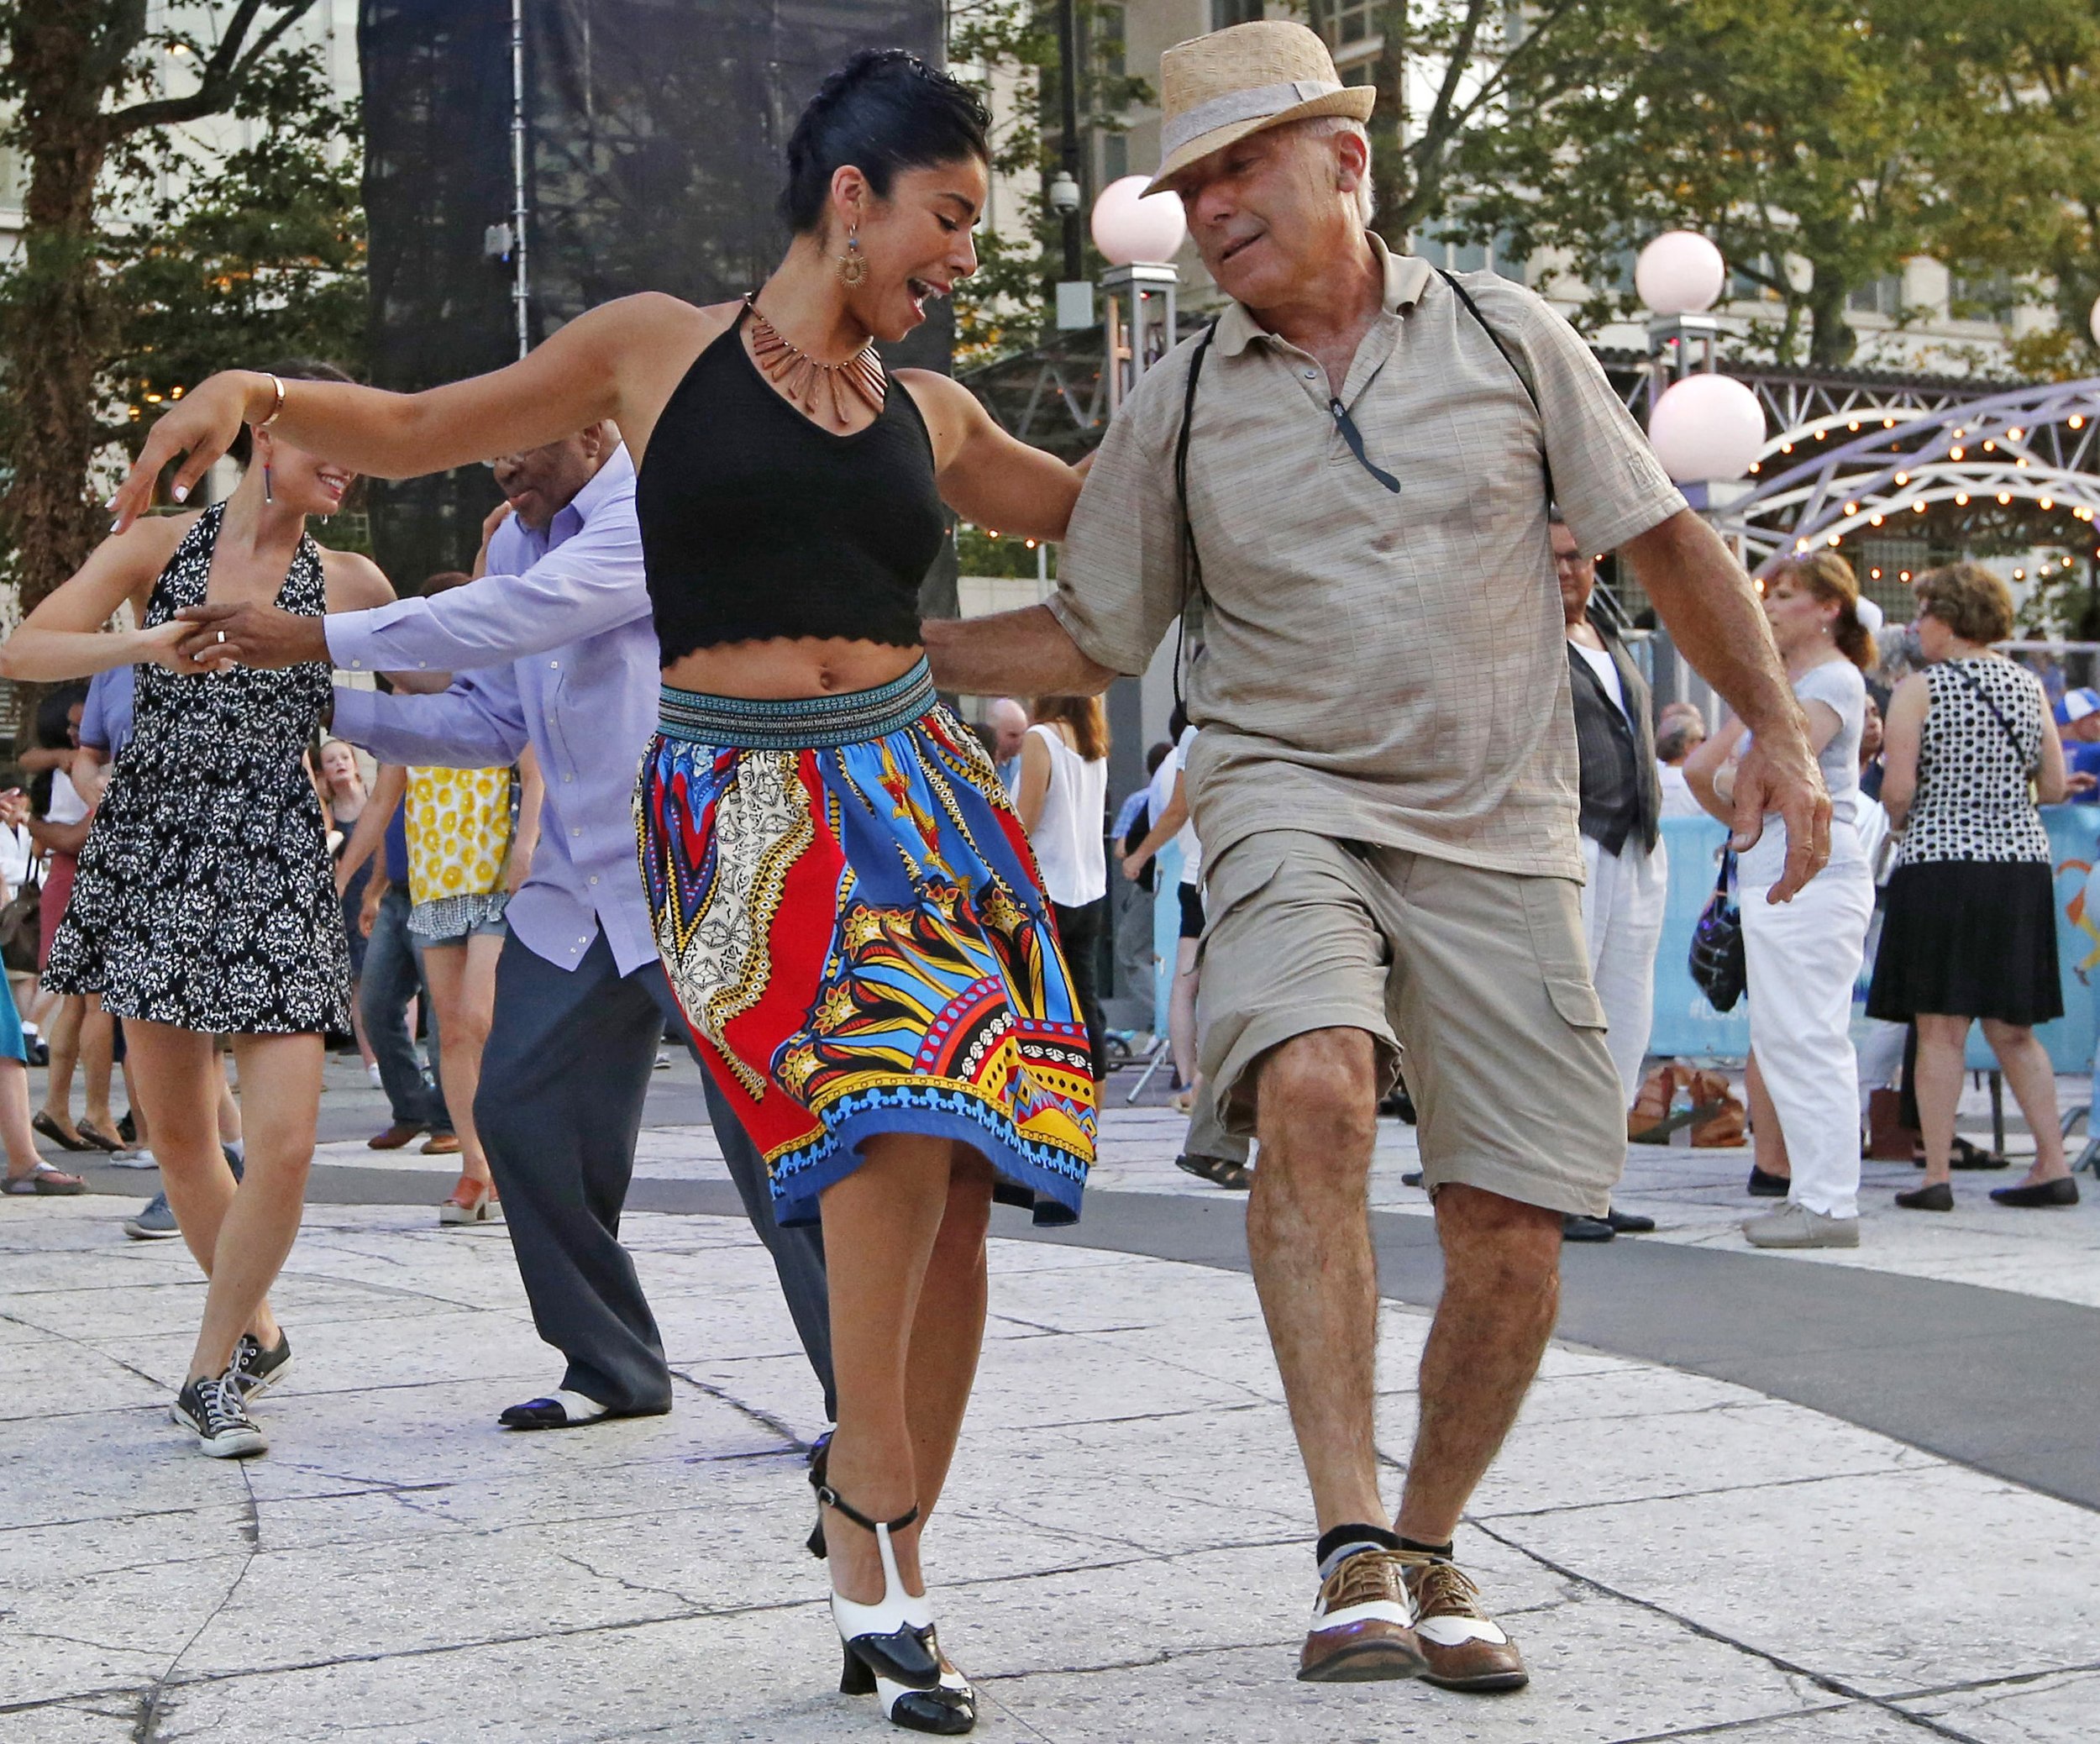  Sherise Cortez of New York City and Bill Ragona of Long Island, NY., dance to the music of Midsummer Night Swing, an outdoor summer dance series that includes big band music, Lindy hop, salsa, hustle, Charleston, tango, and more in Lincoln Center's 